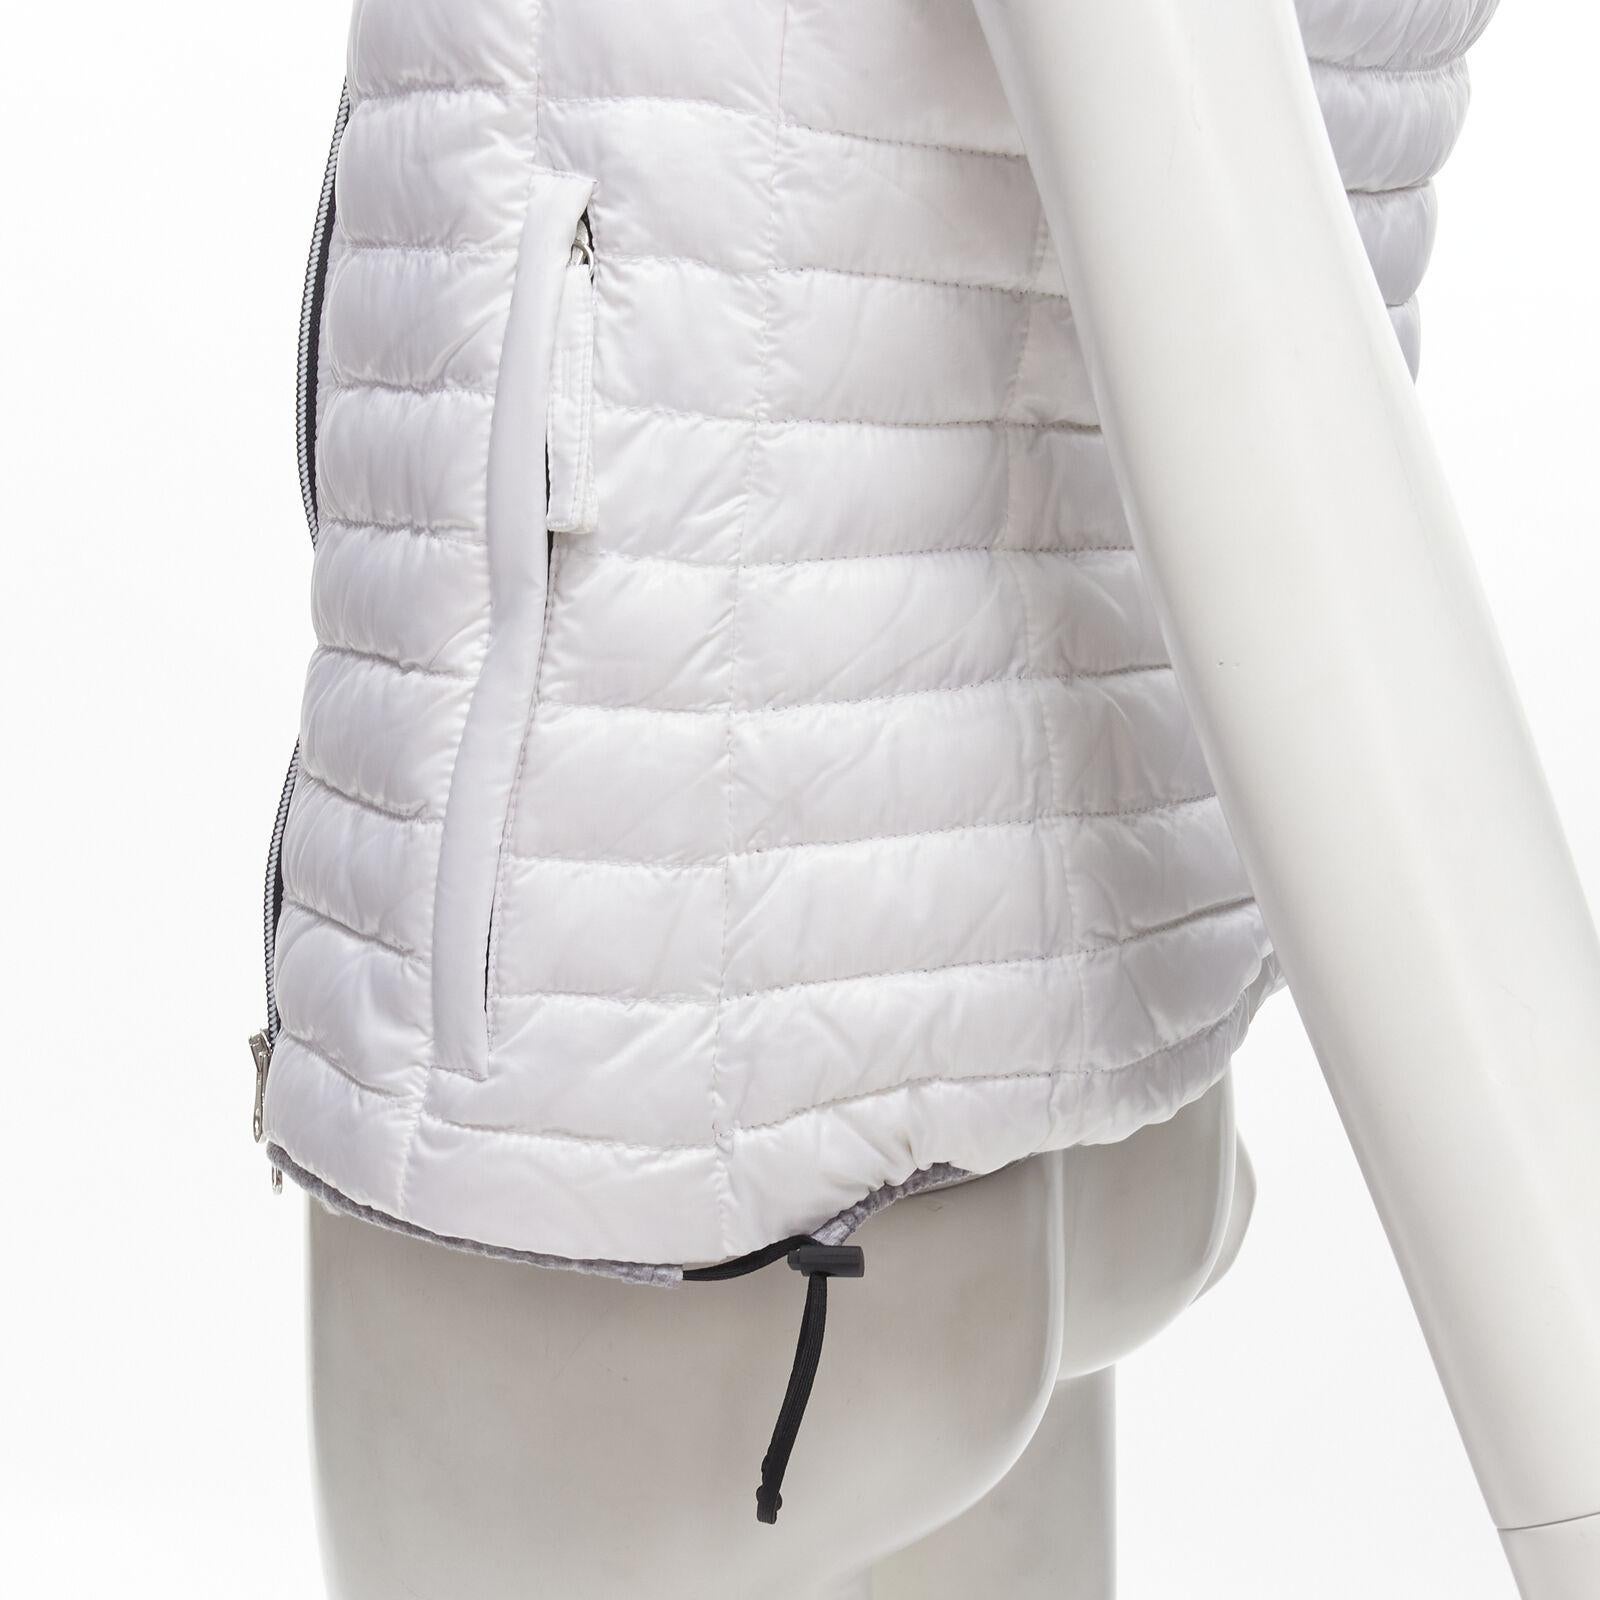 DUVETICA white pure goose new down padded zip hoodie puffer vest jacket IT38 XS
Reference: LNKO/A02039
Brand: Duvetica
Material: Goose Down
Color: White
Pattern: Solid
Closure: Zip
Lining: Fabric
Extra Details: Elastics and stopper detail at sides